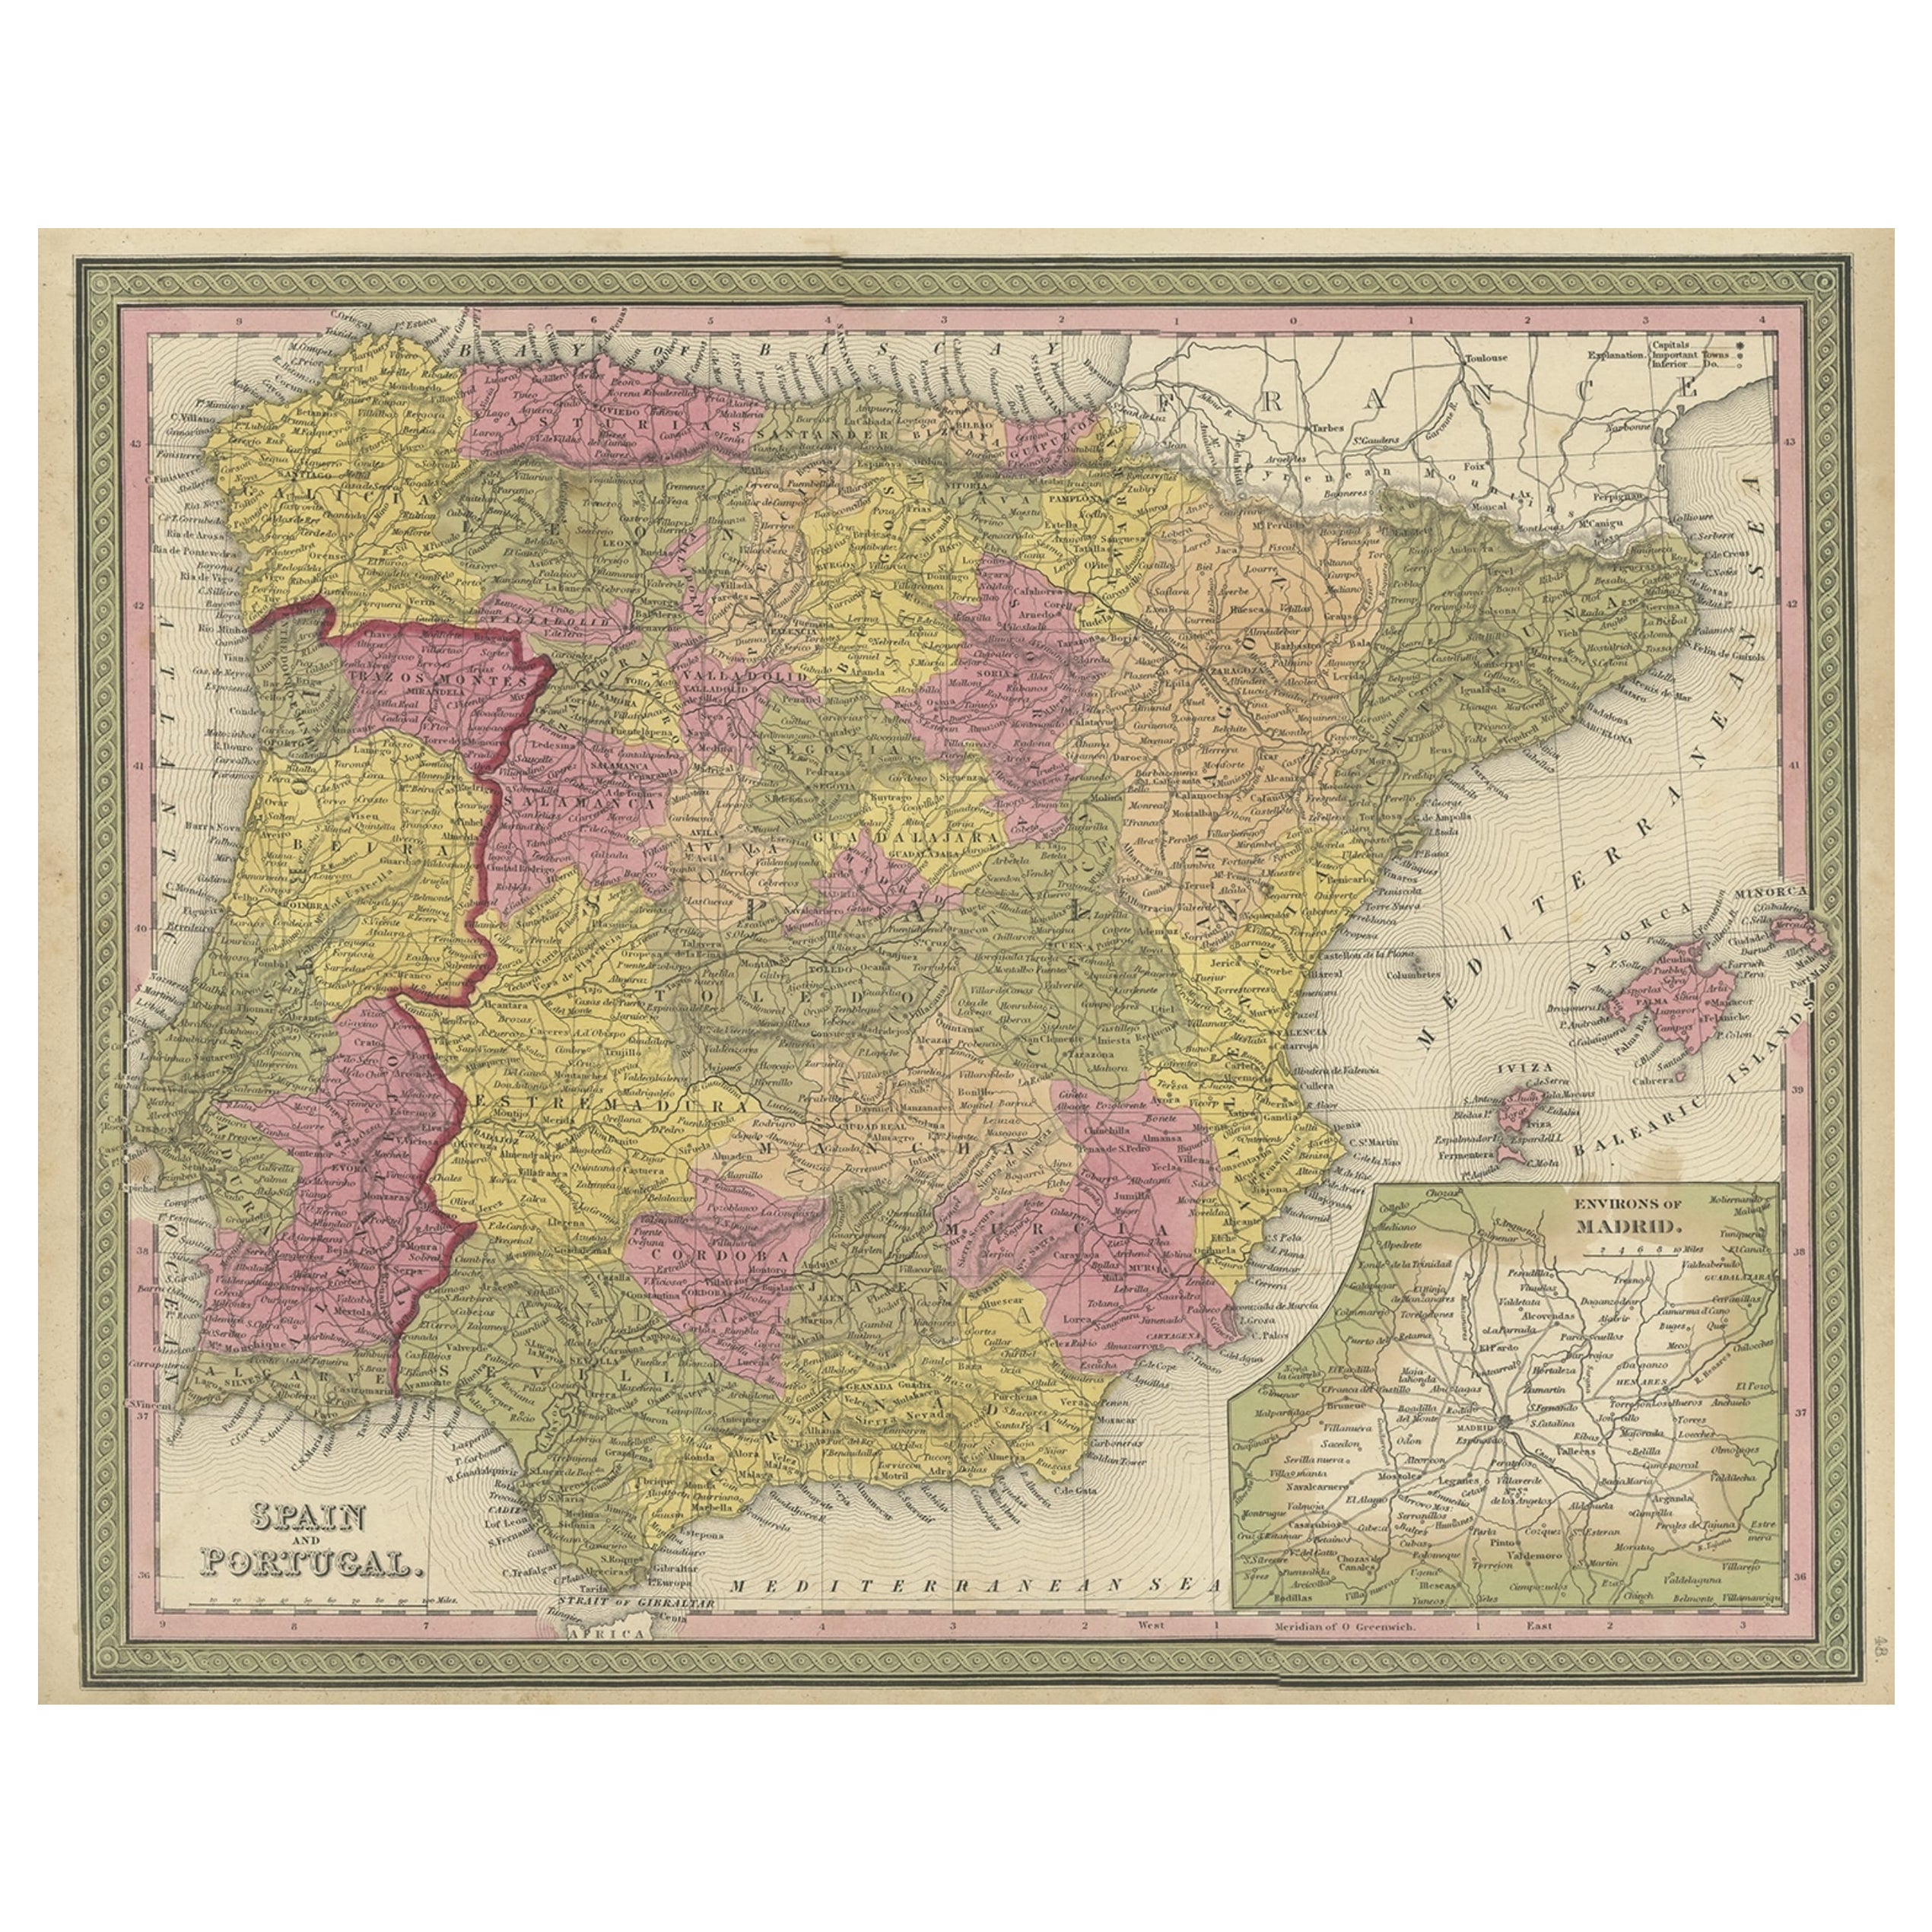 Old Map of Spain and Portugal, with an Inset Map of the Region of Madrid, 1846